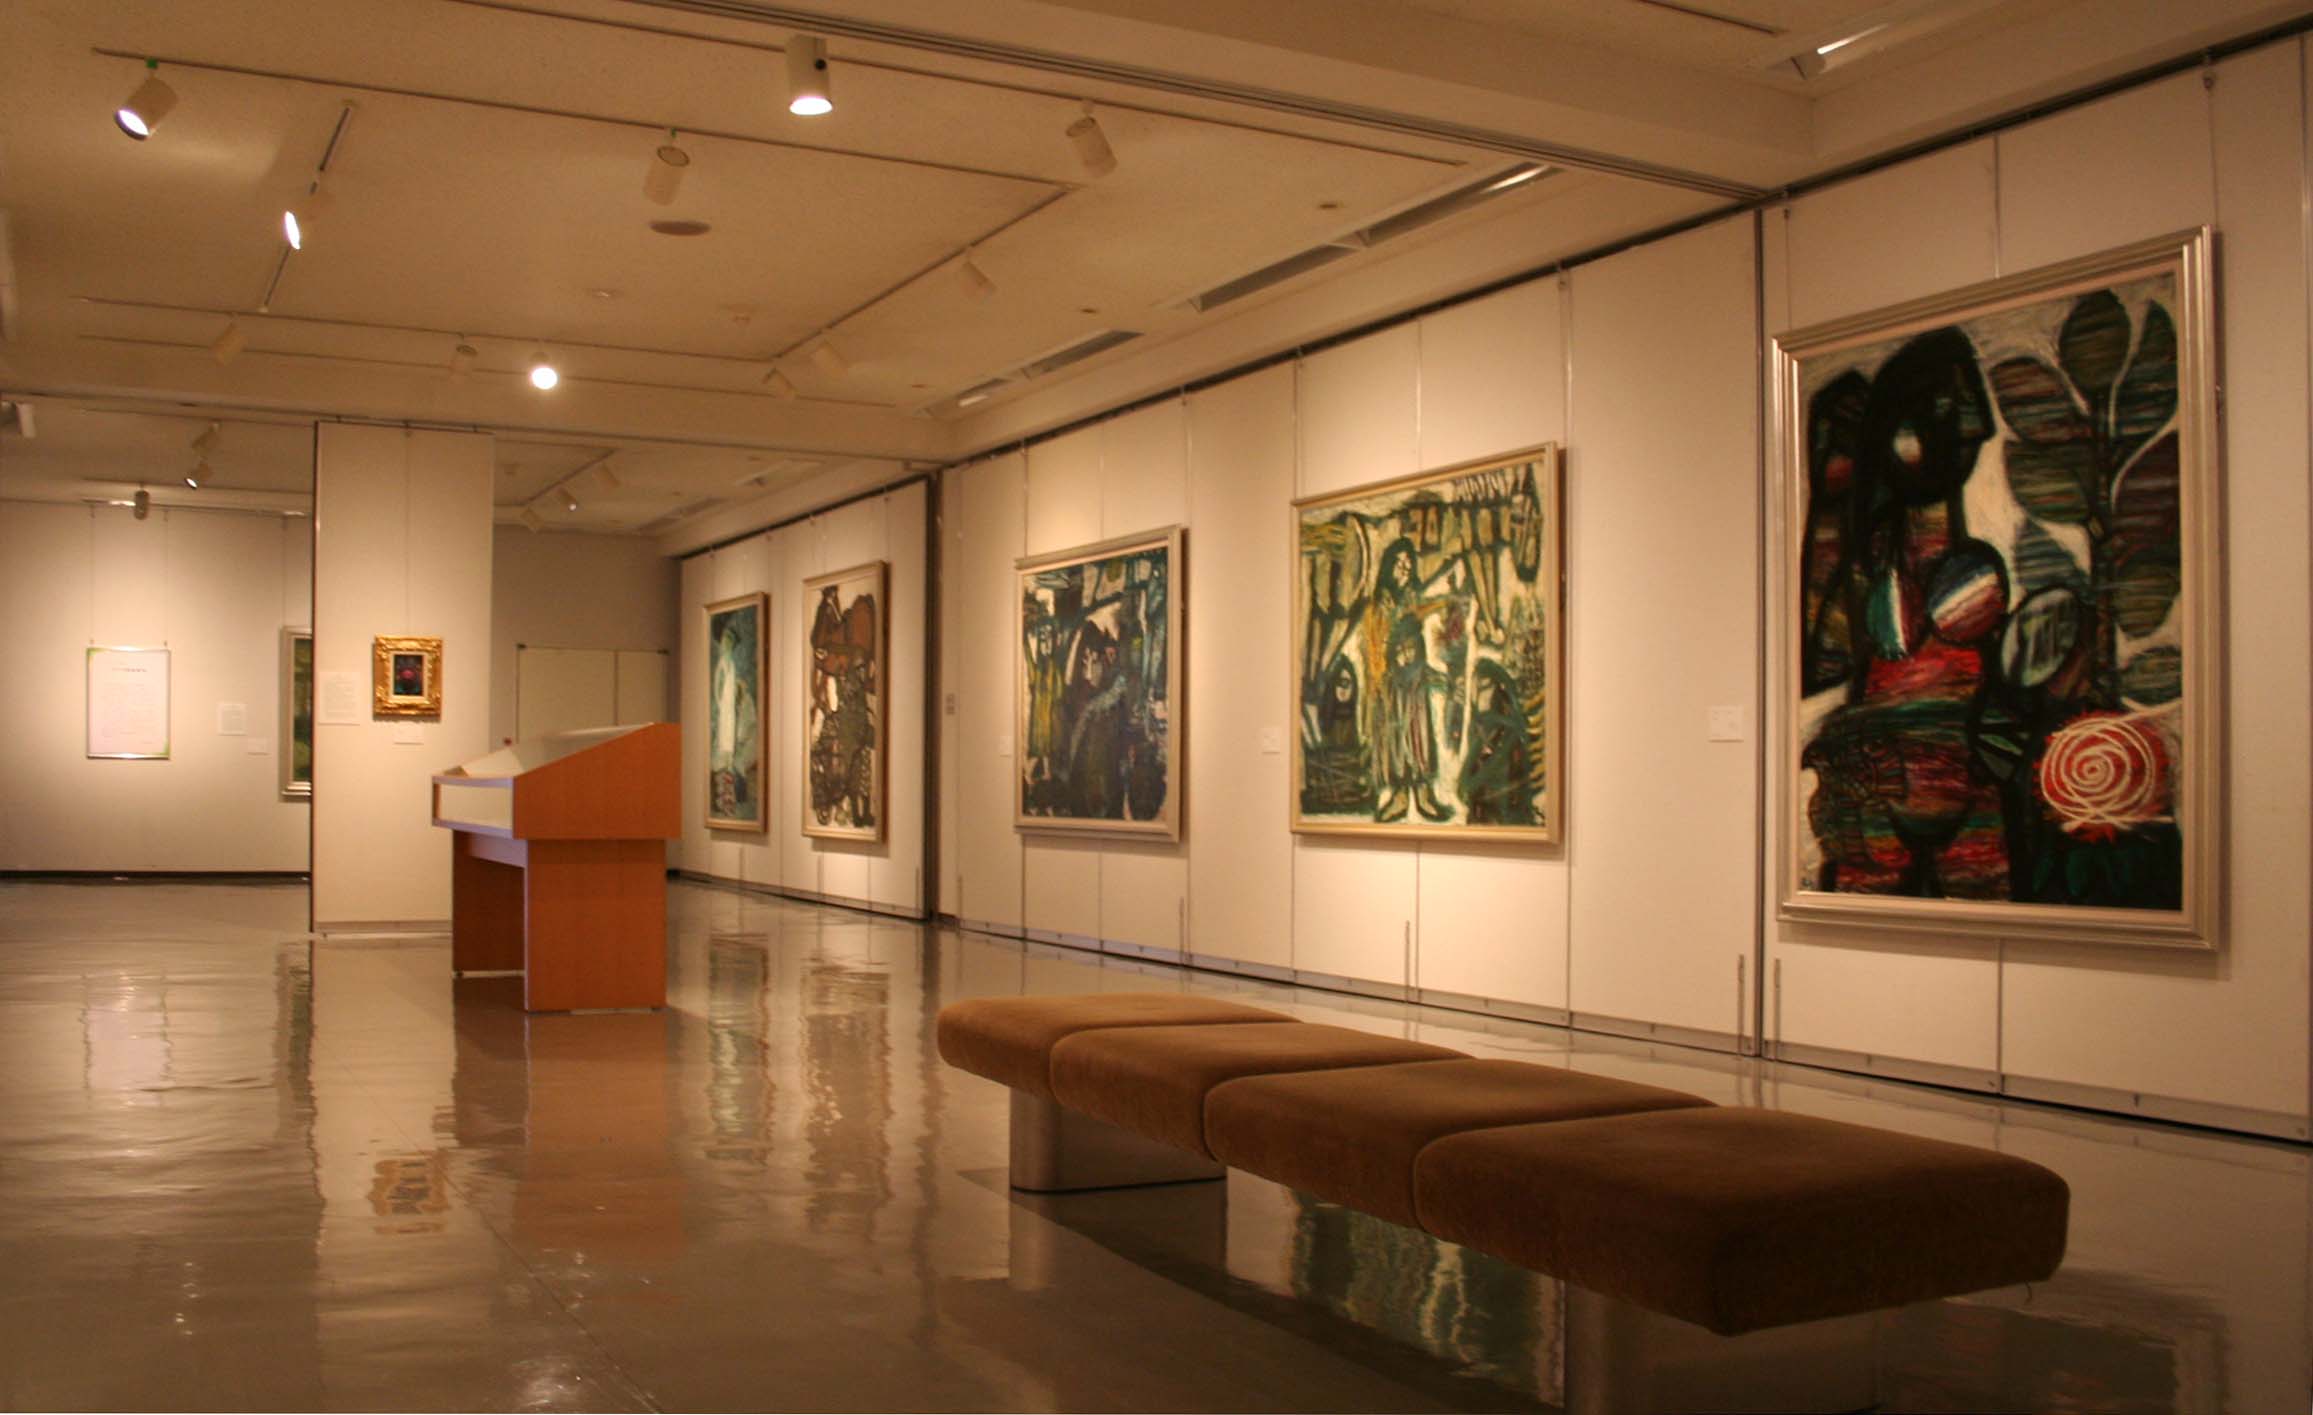 Exhibition space during “The Postwar Art Community of Hachinohe” （2016）